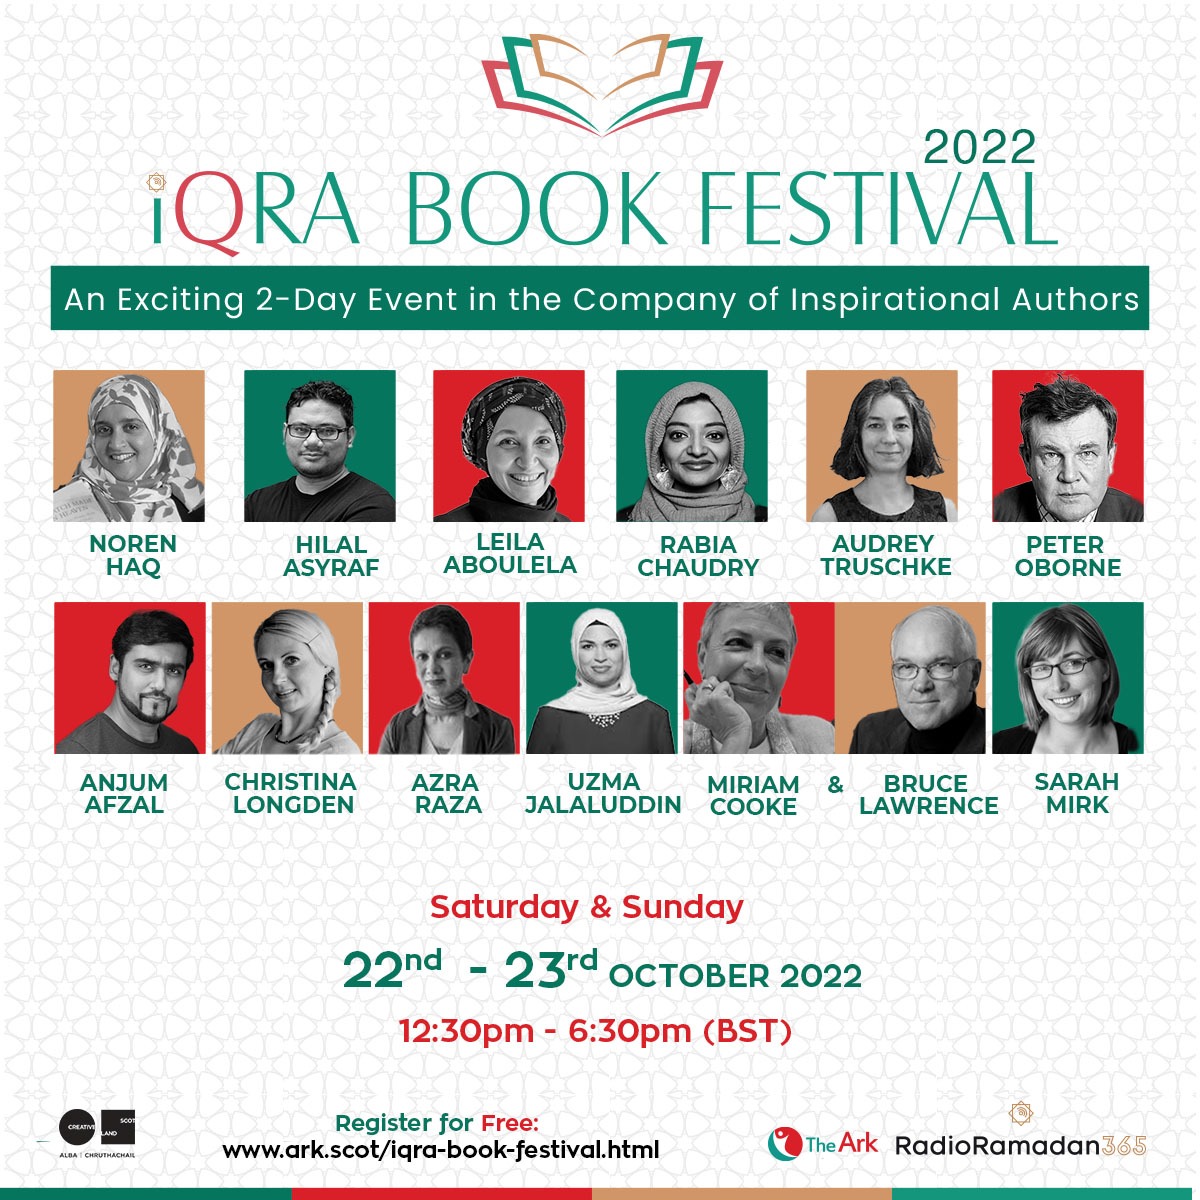 We are delighted to announce that the third annual Iqra Book Festival will take place on the 22nd and 23rd October 2022. Join us for 2 days of exciting discussions of riveting works from a range of prolific authors. *Register for FREE at ark.scot/iqra-book-fest…*